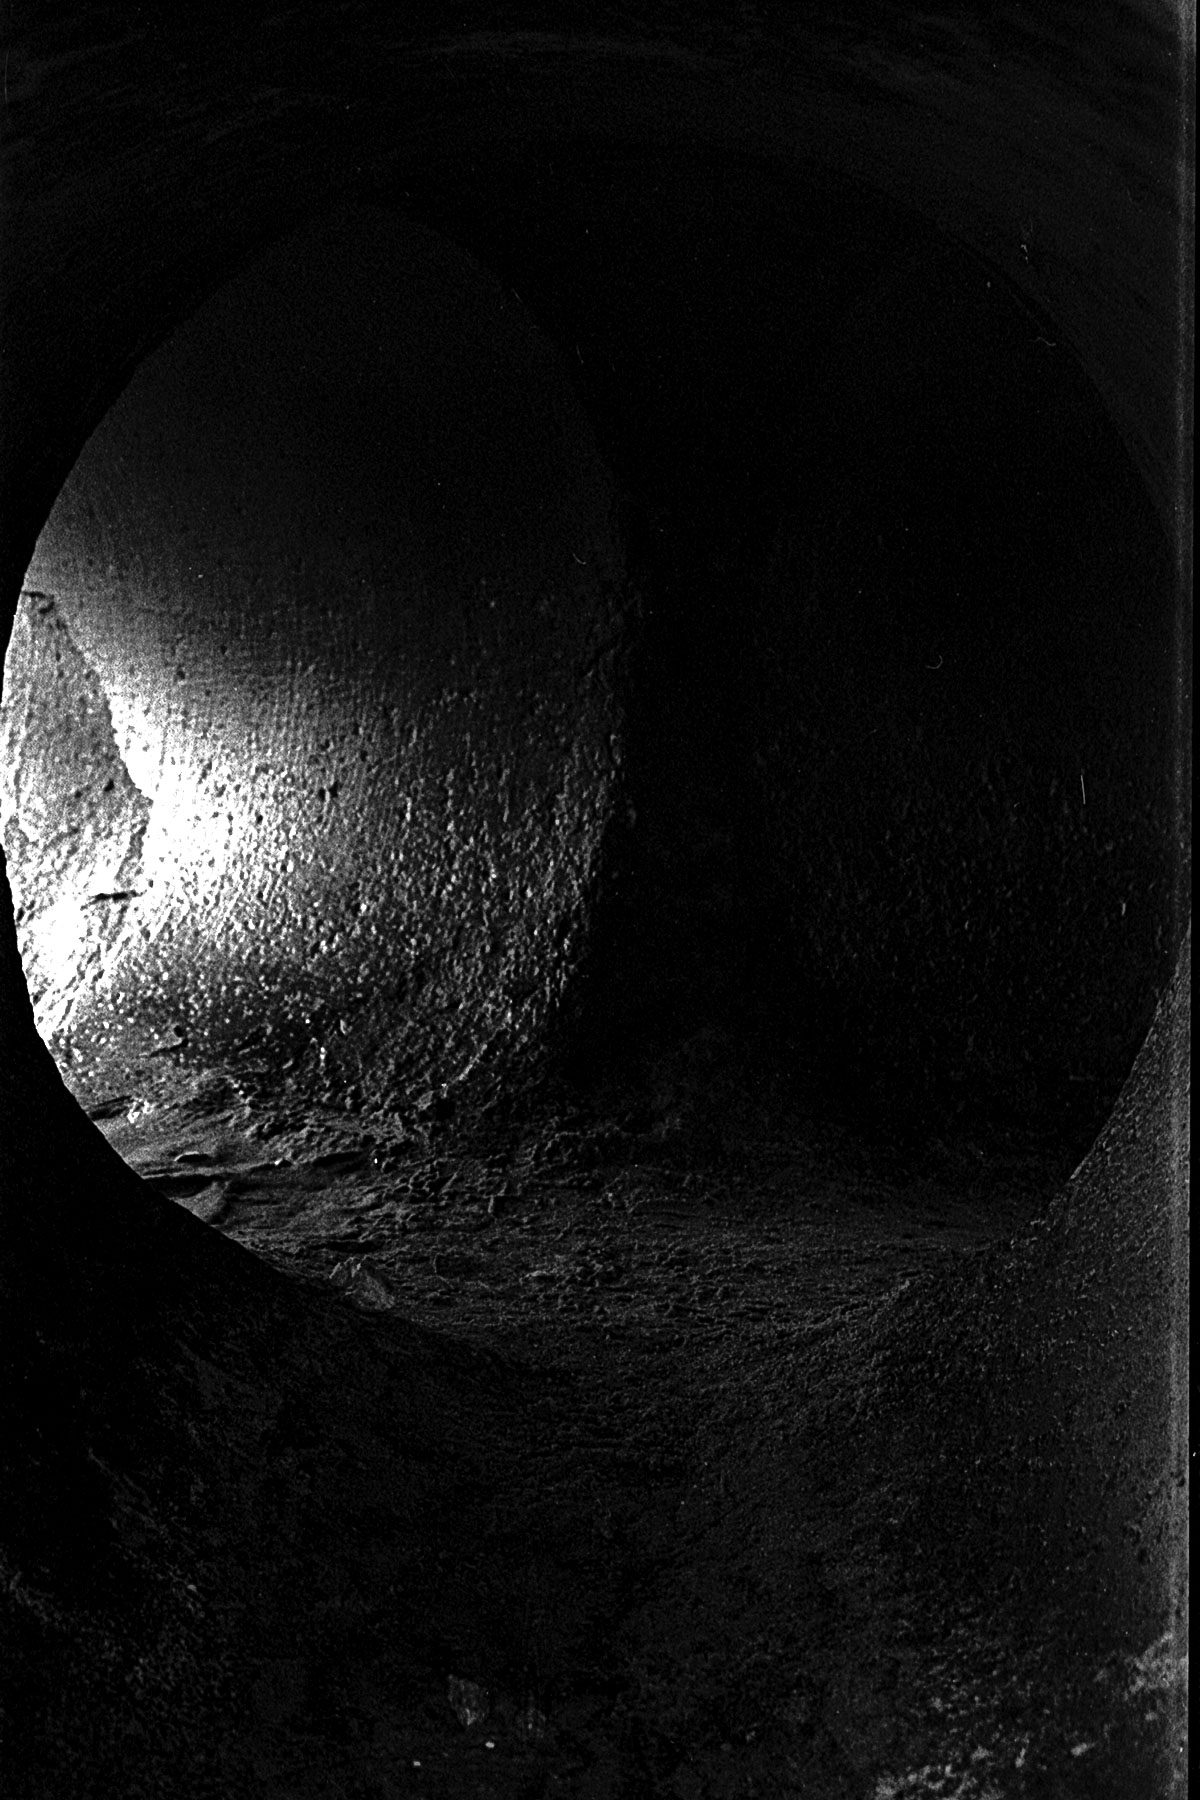 @ADavyphoto Replying to @ILFORDPhoto My #concretefilm for #fridayfavourites is the inside of a play structure at Roker beach in Sunderland. #ilfordphoto #35mmfilm #shootfilmbenice #photography